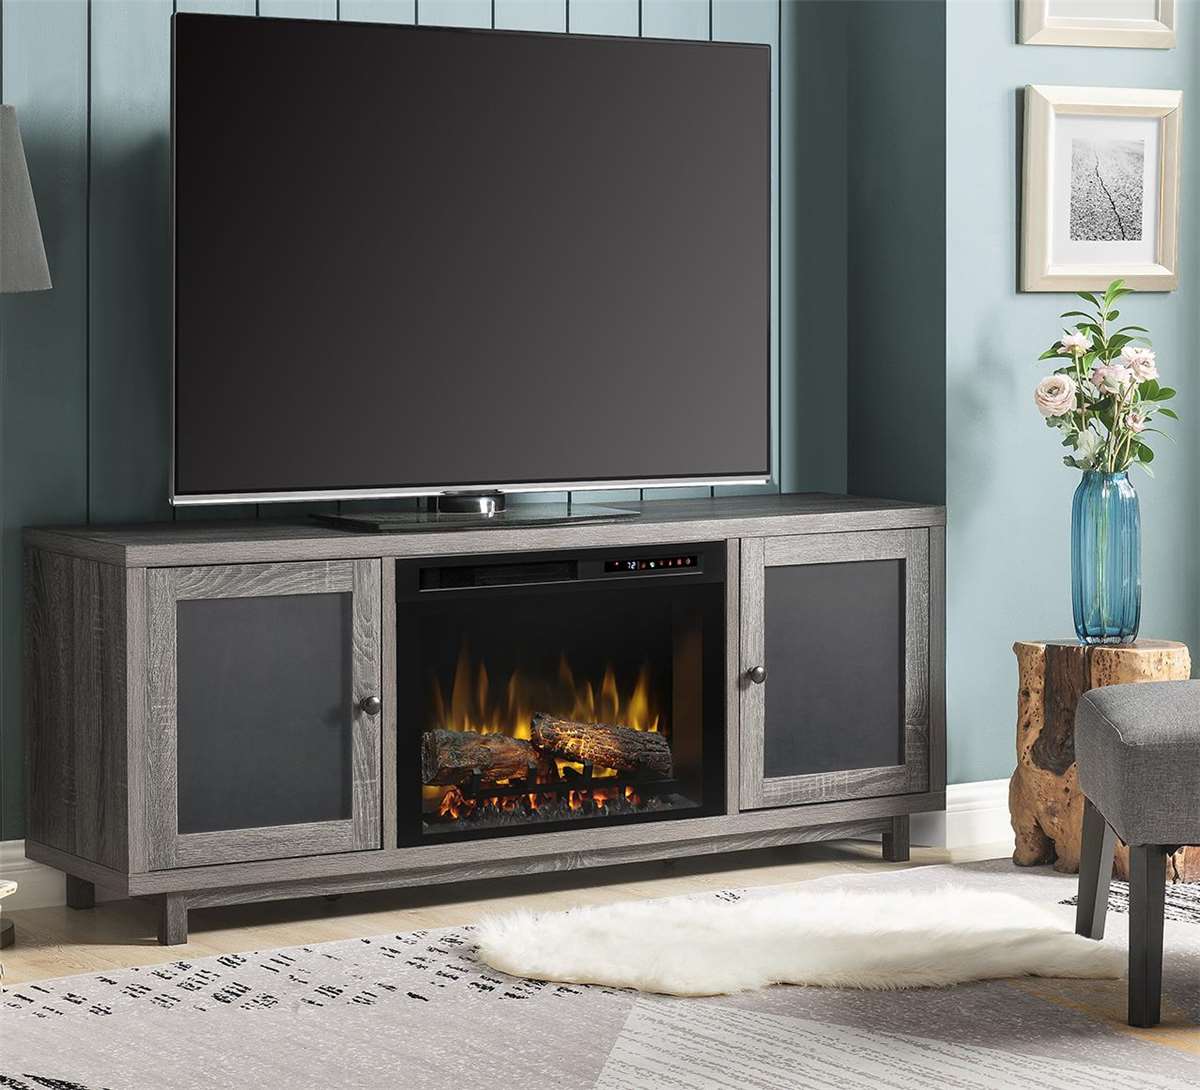 Dimplex Jesse electric fireplace package with chalkboard finish door insert.